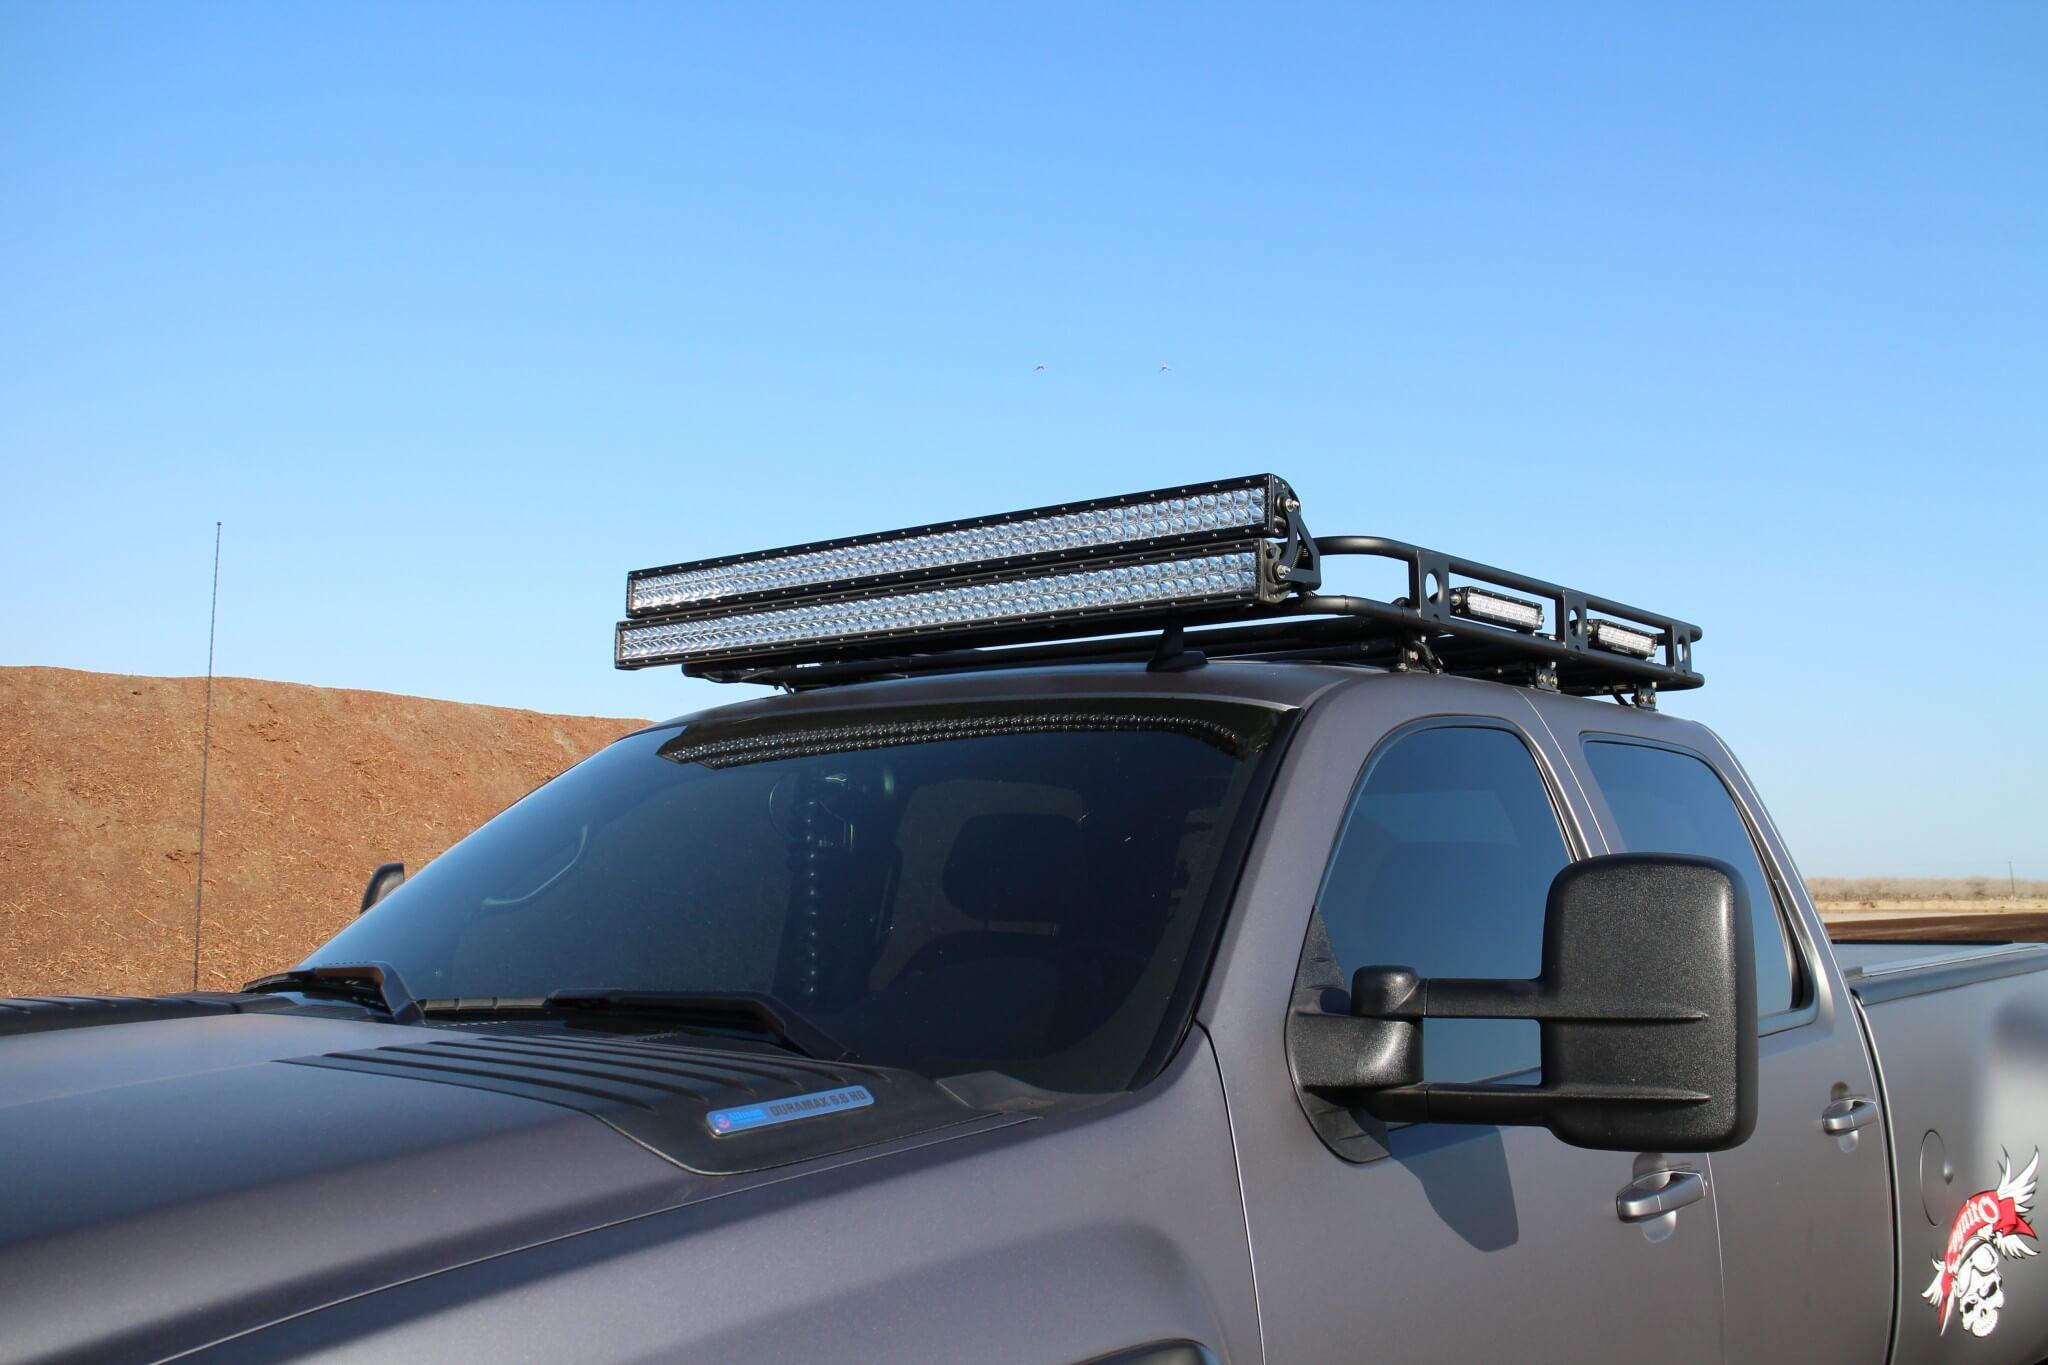 A Smittybuilt Defender roof rack was fitted with two stacked Rigid Industries 50-inch LED light bars up front, two 10-inch bars on each side and a single 30-inch bar to the rear. 